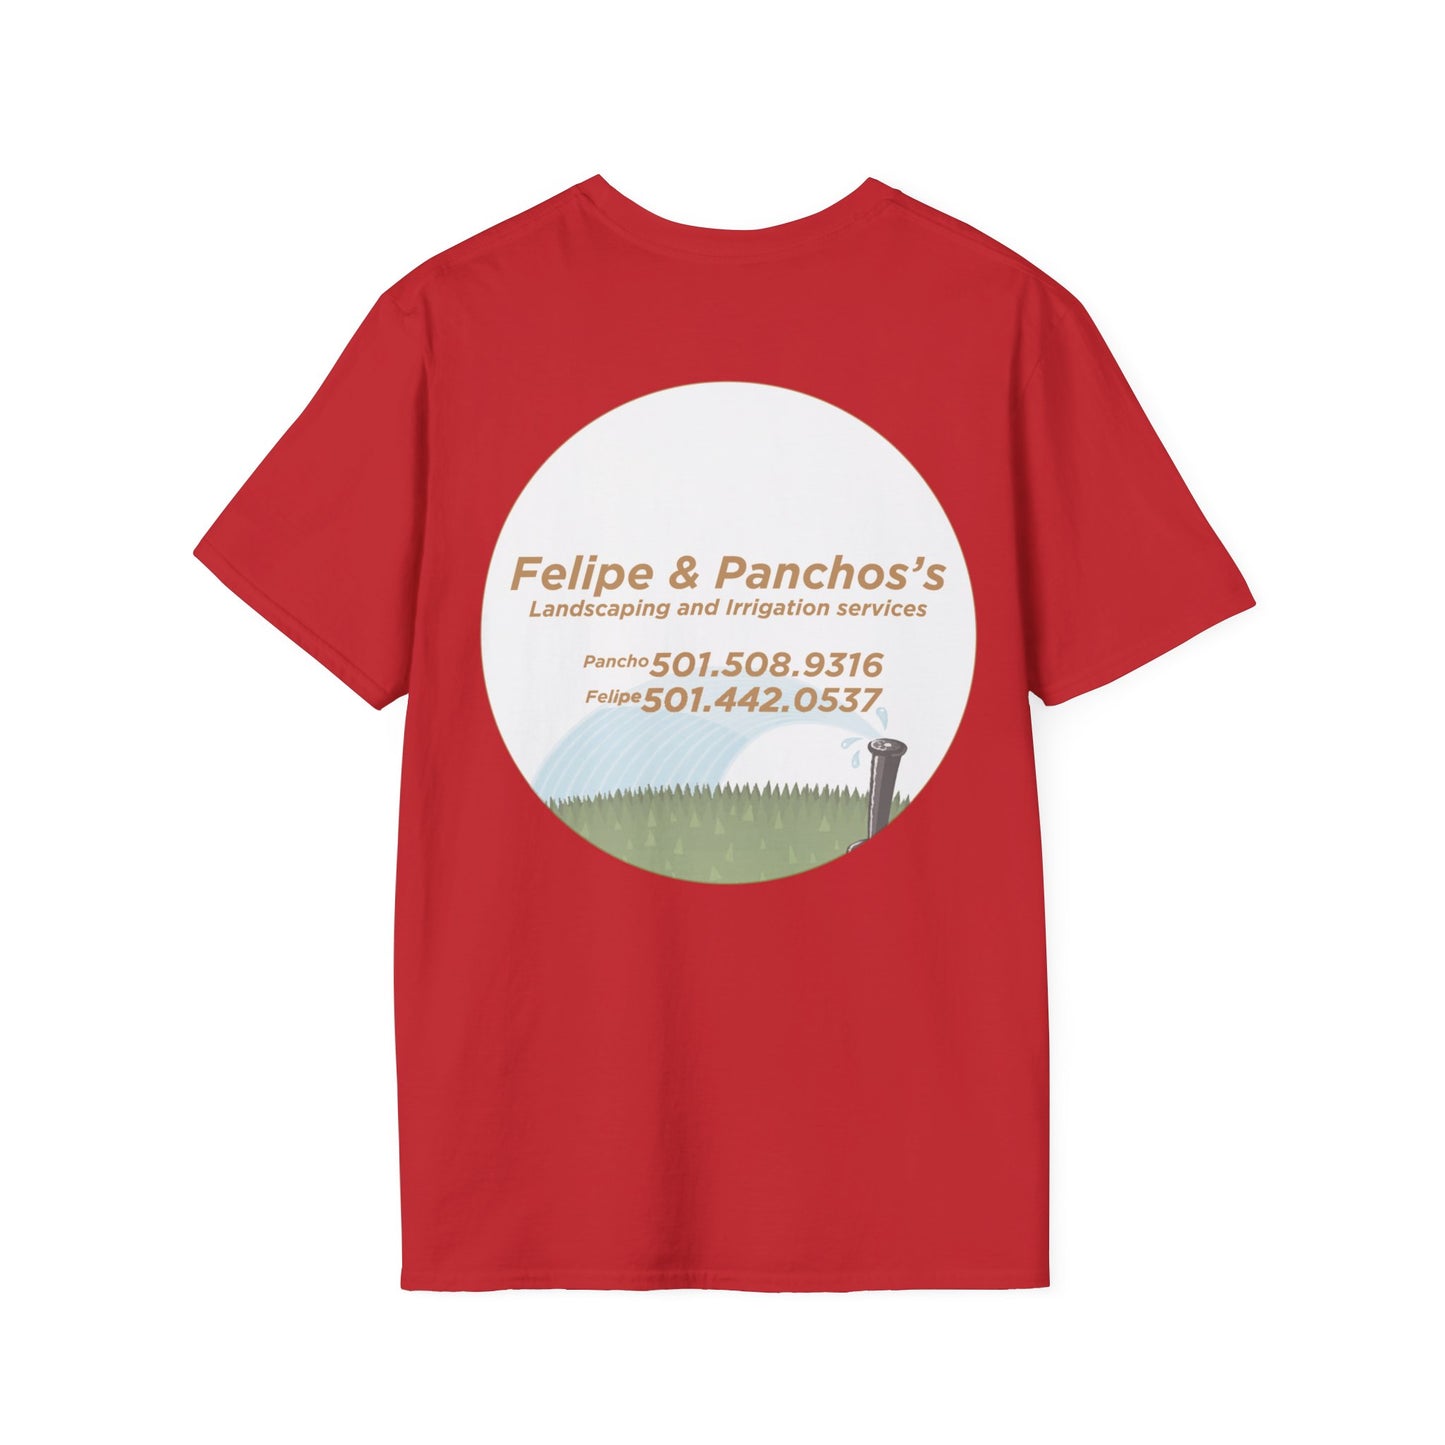 Felipe and Panchos's Landscaping and Irrigation Services T-Shirt